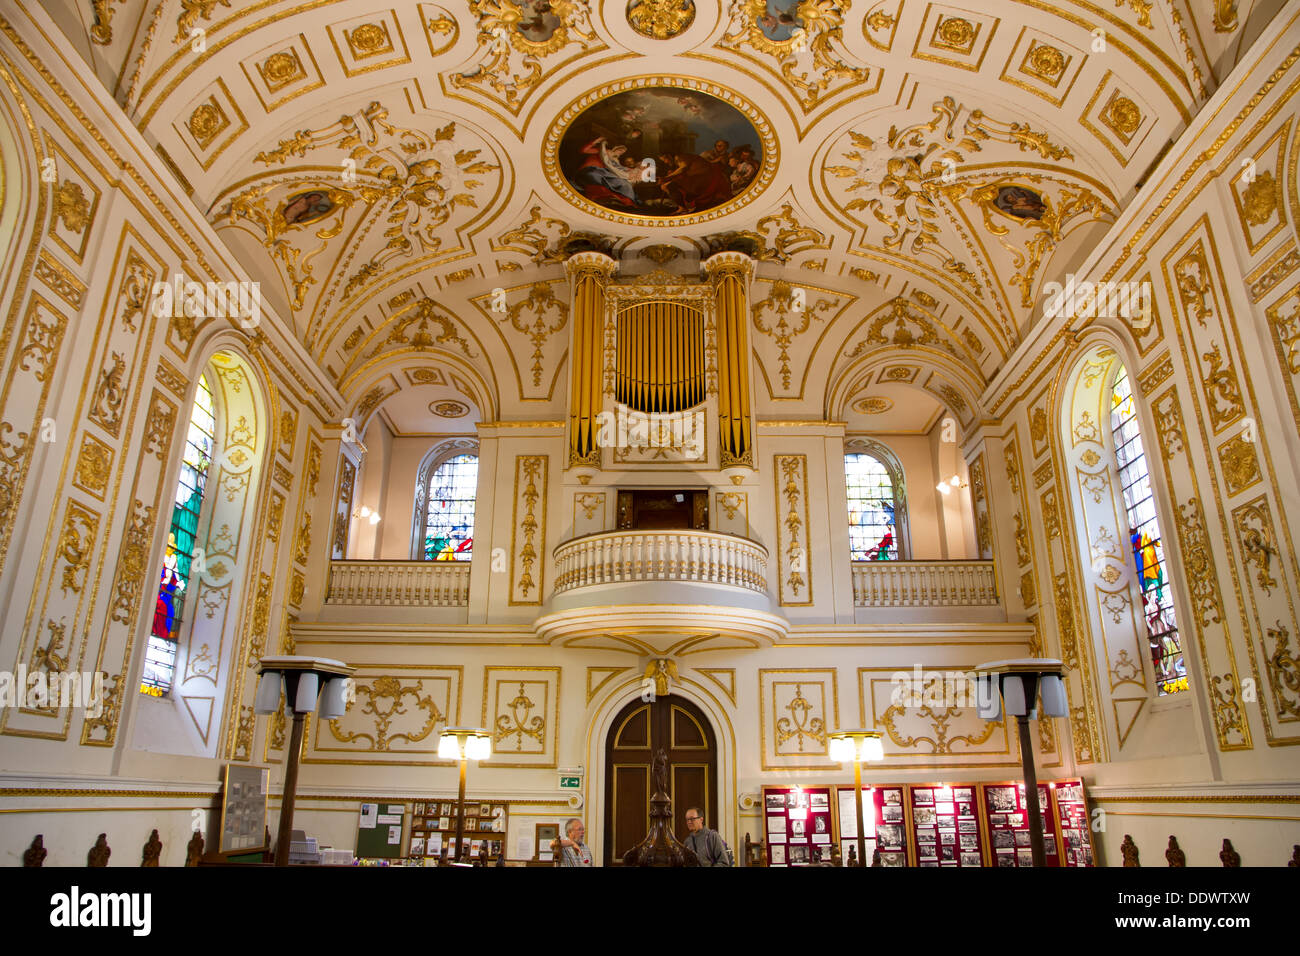 The Italianate Baroque interior of Great Witley Church in Witley Court, Worcestershire, England. Stock Photo